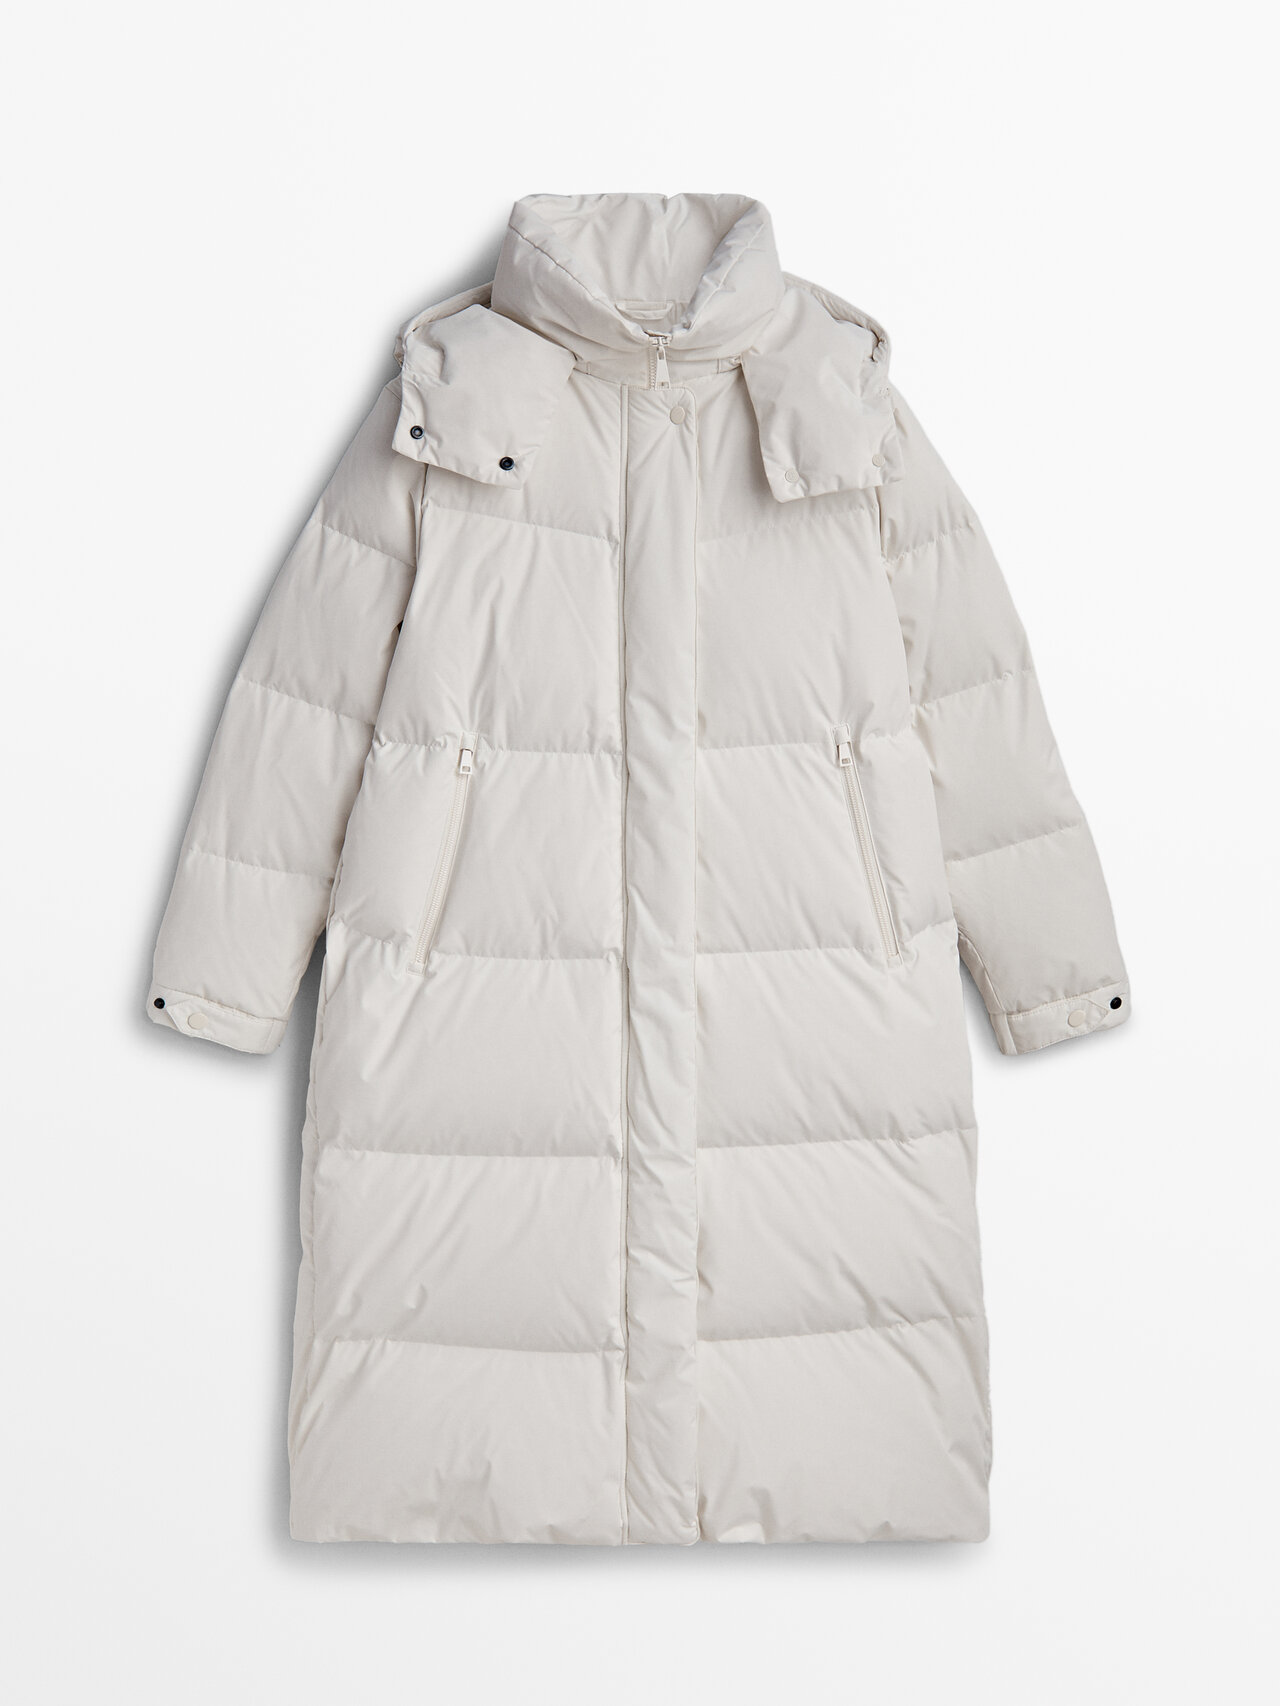 Massimo Dutti Hooded Technical Jacket With Down And Feathers Filling In Weiss